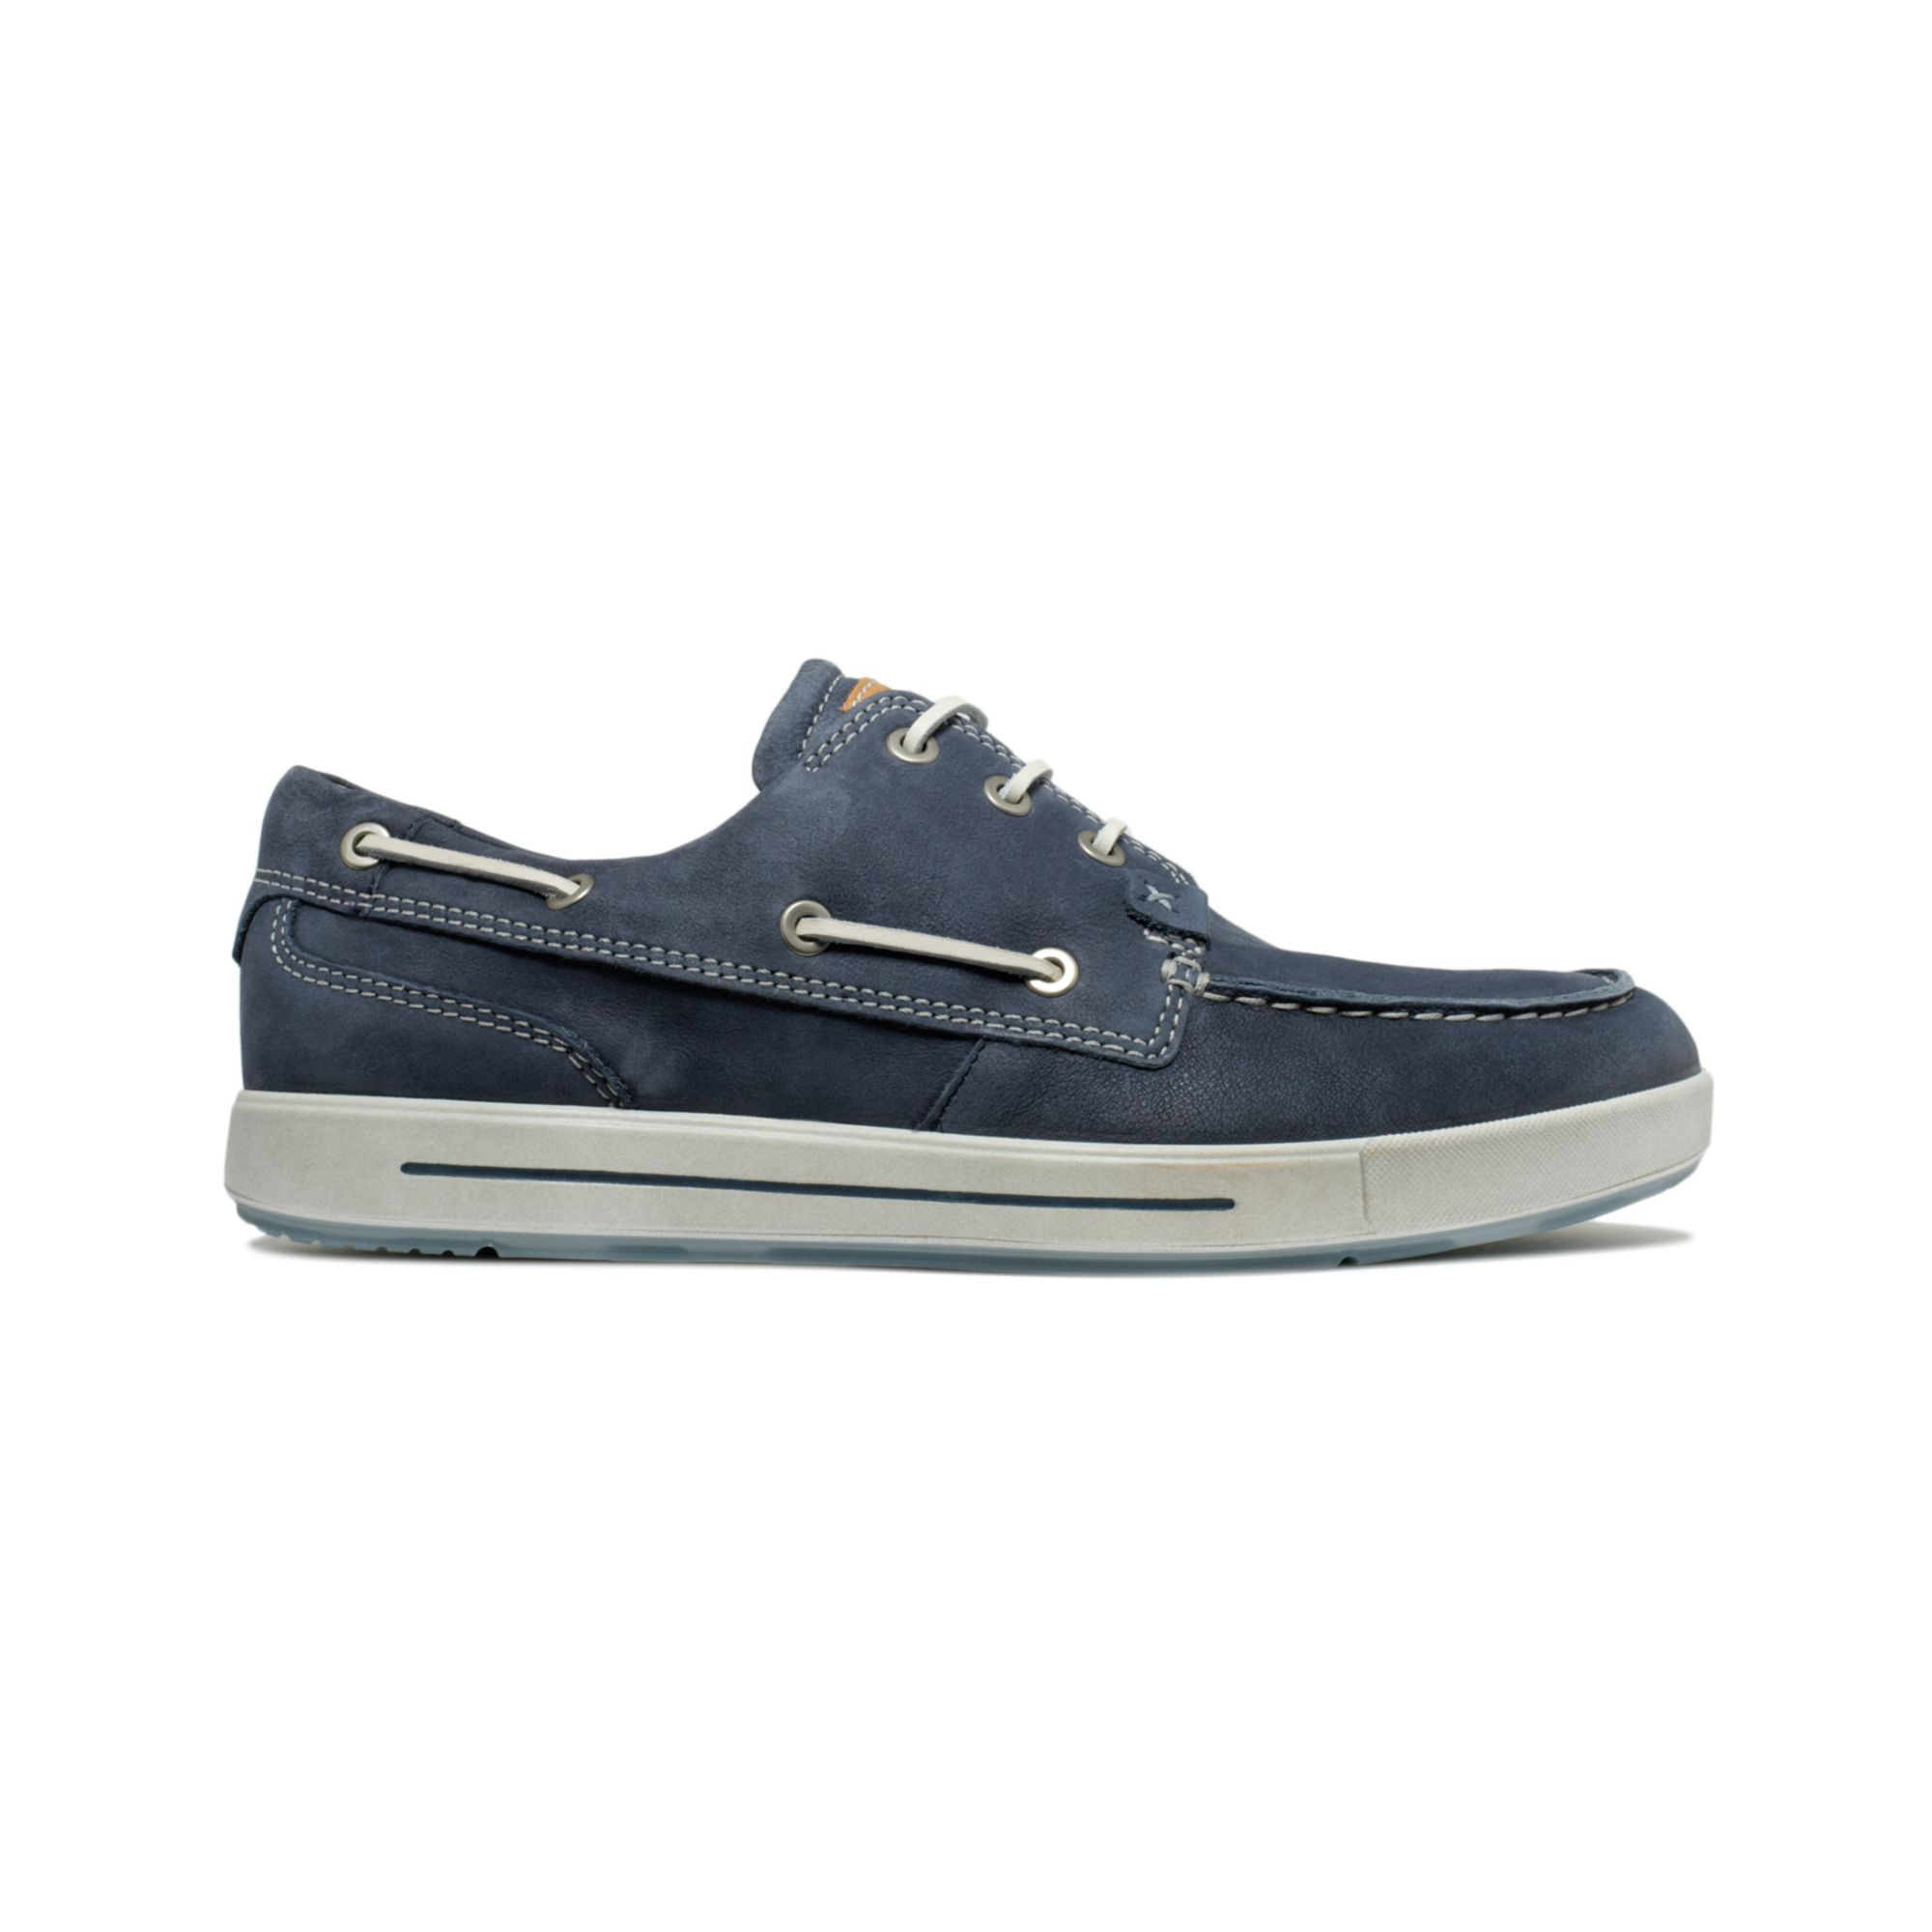 Ecco Androw Boat Shoes in Marine (Blue) for Men - Lyst